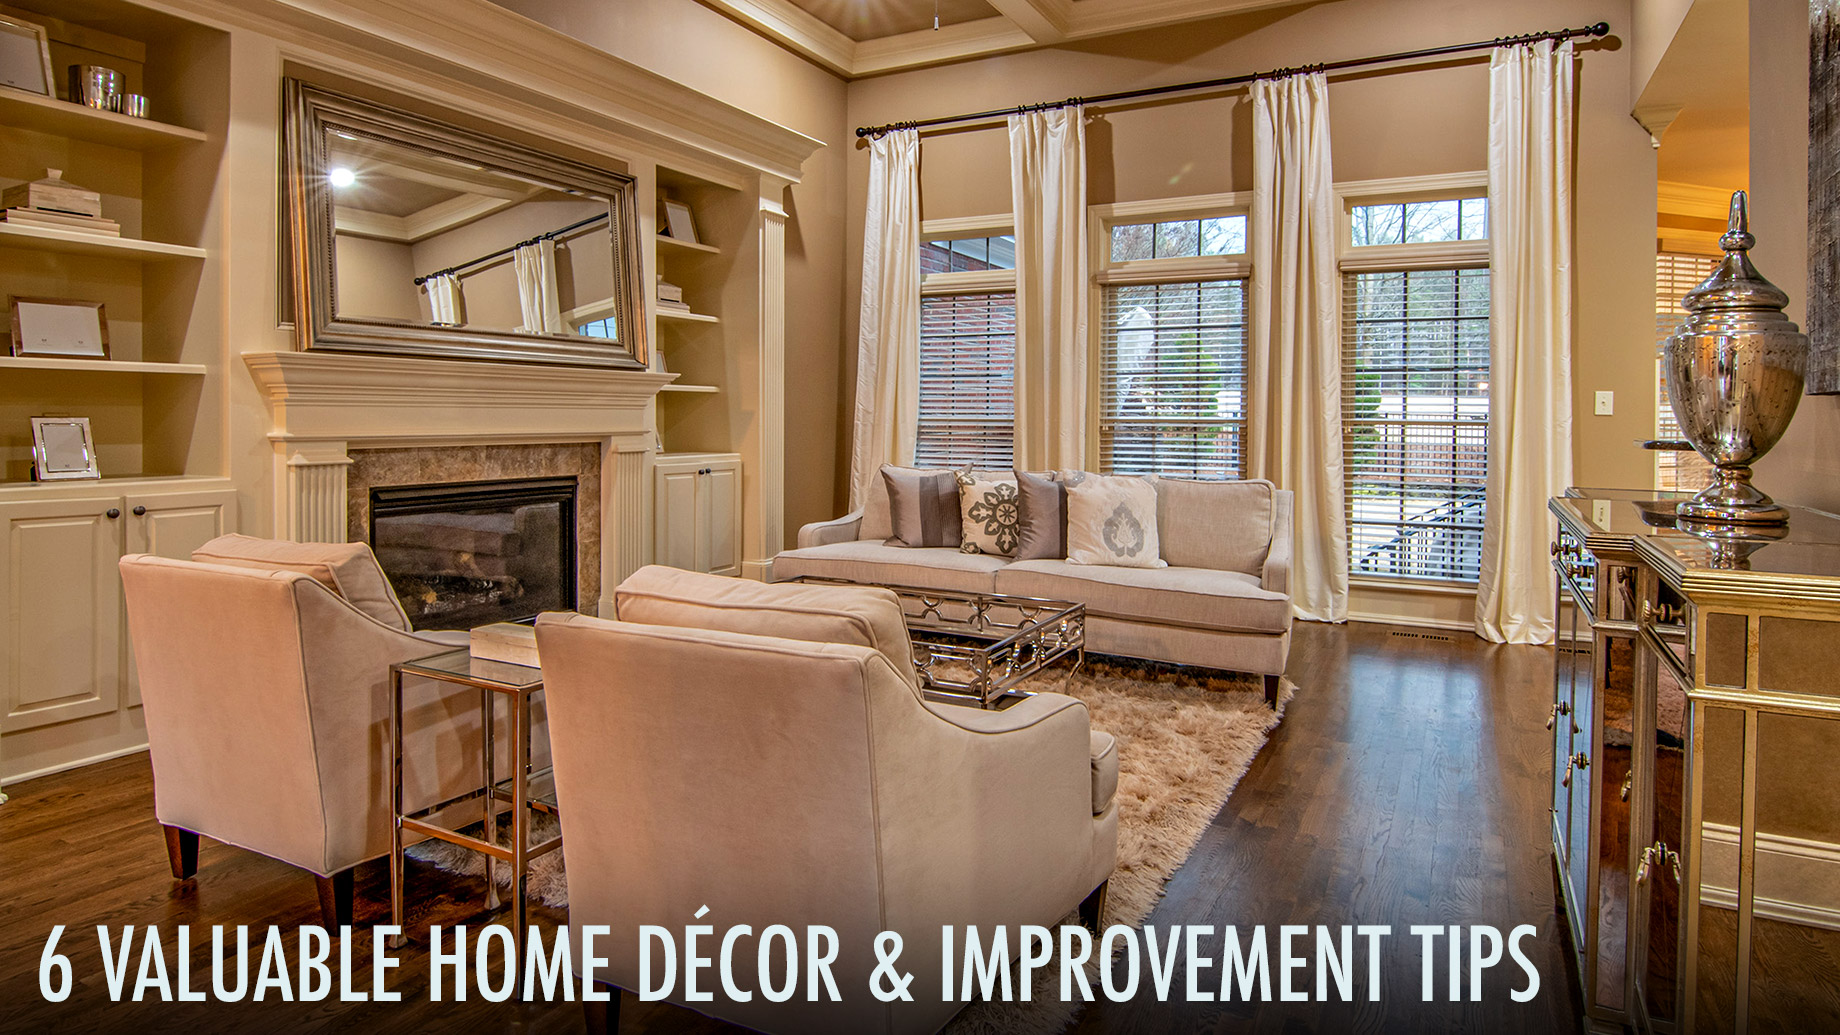 6 Valuable Home Décor & Improvement Tips to Improve Curb Appeal